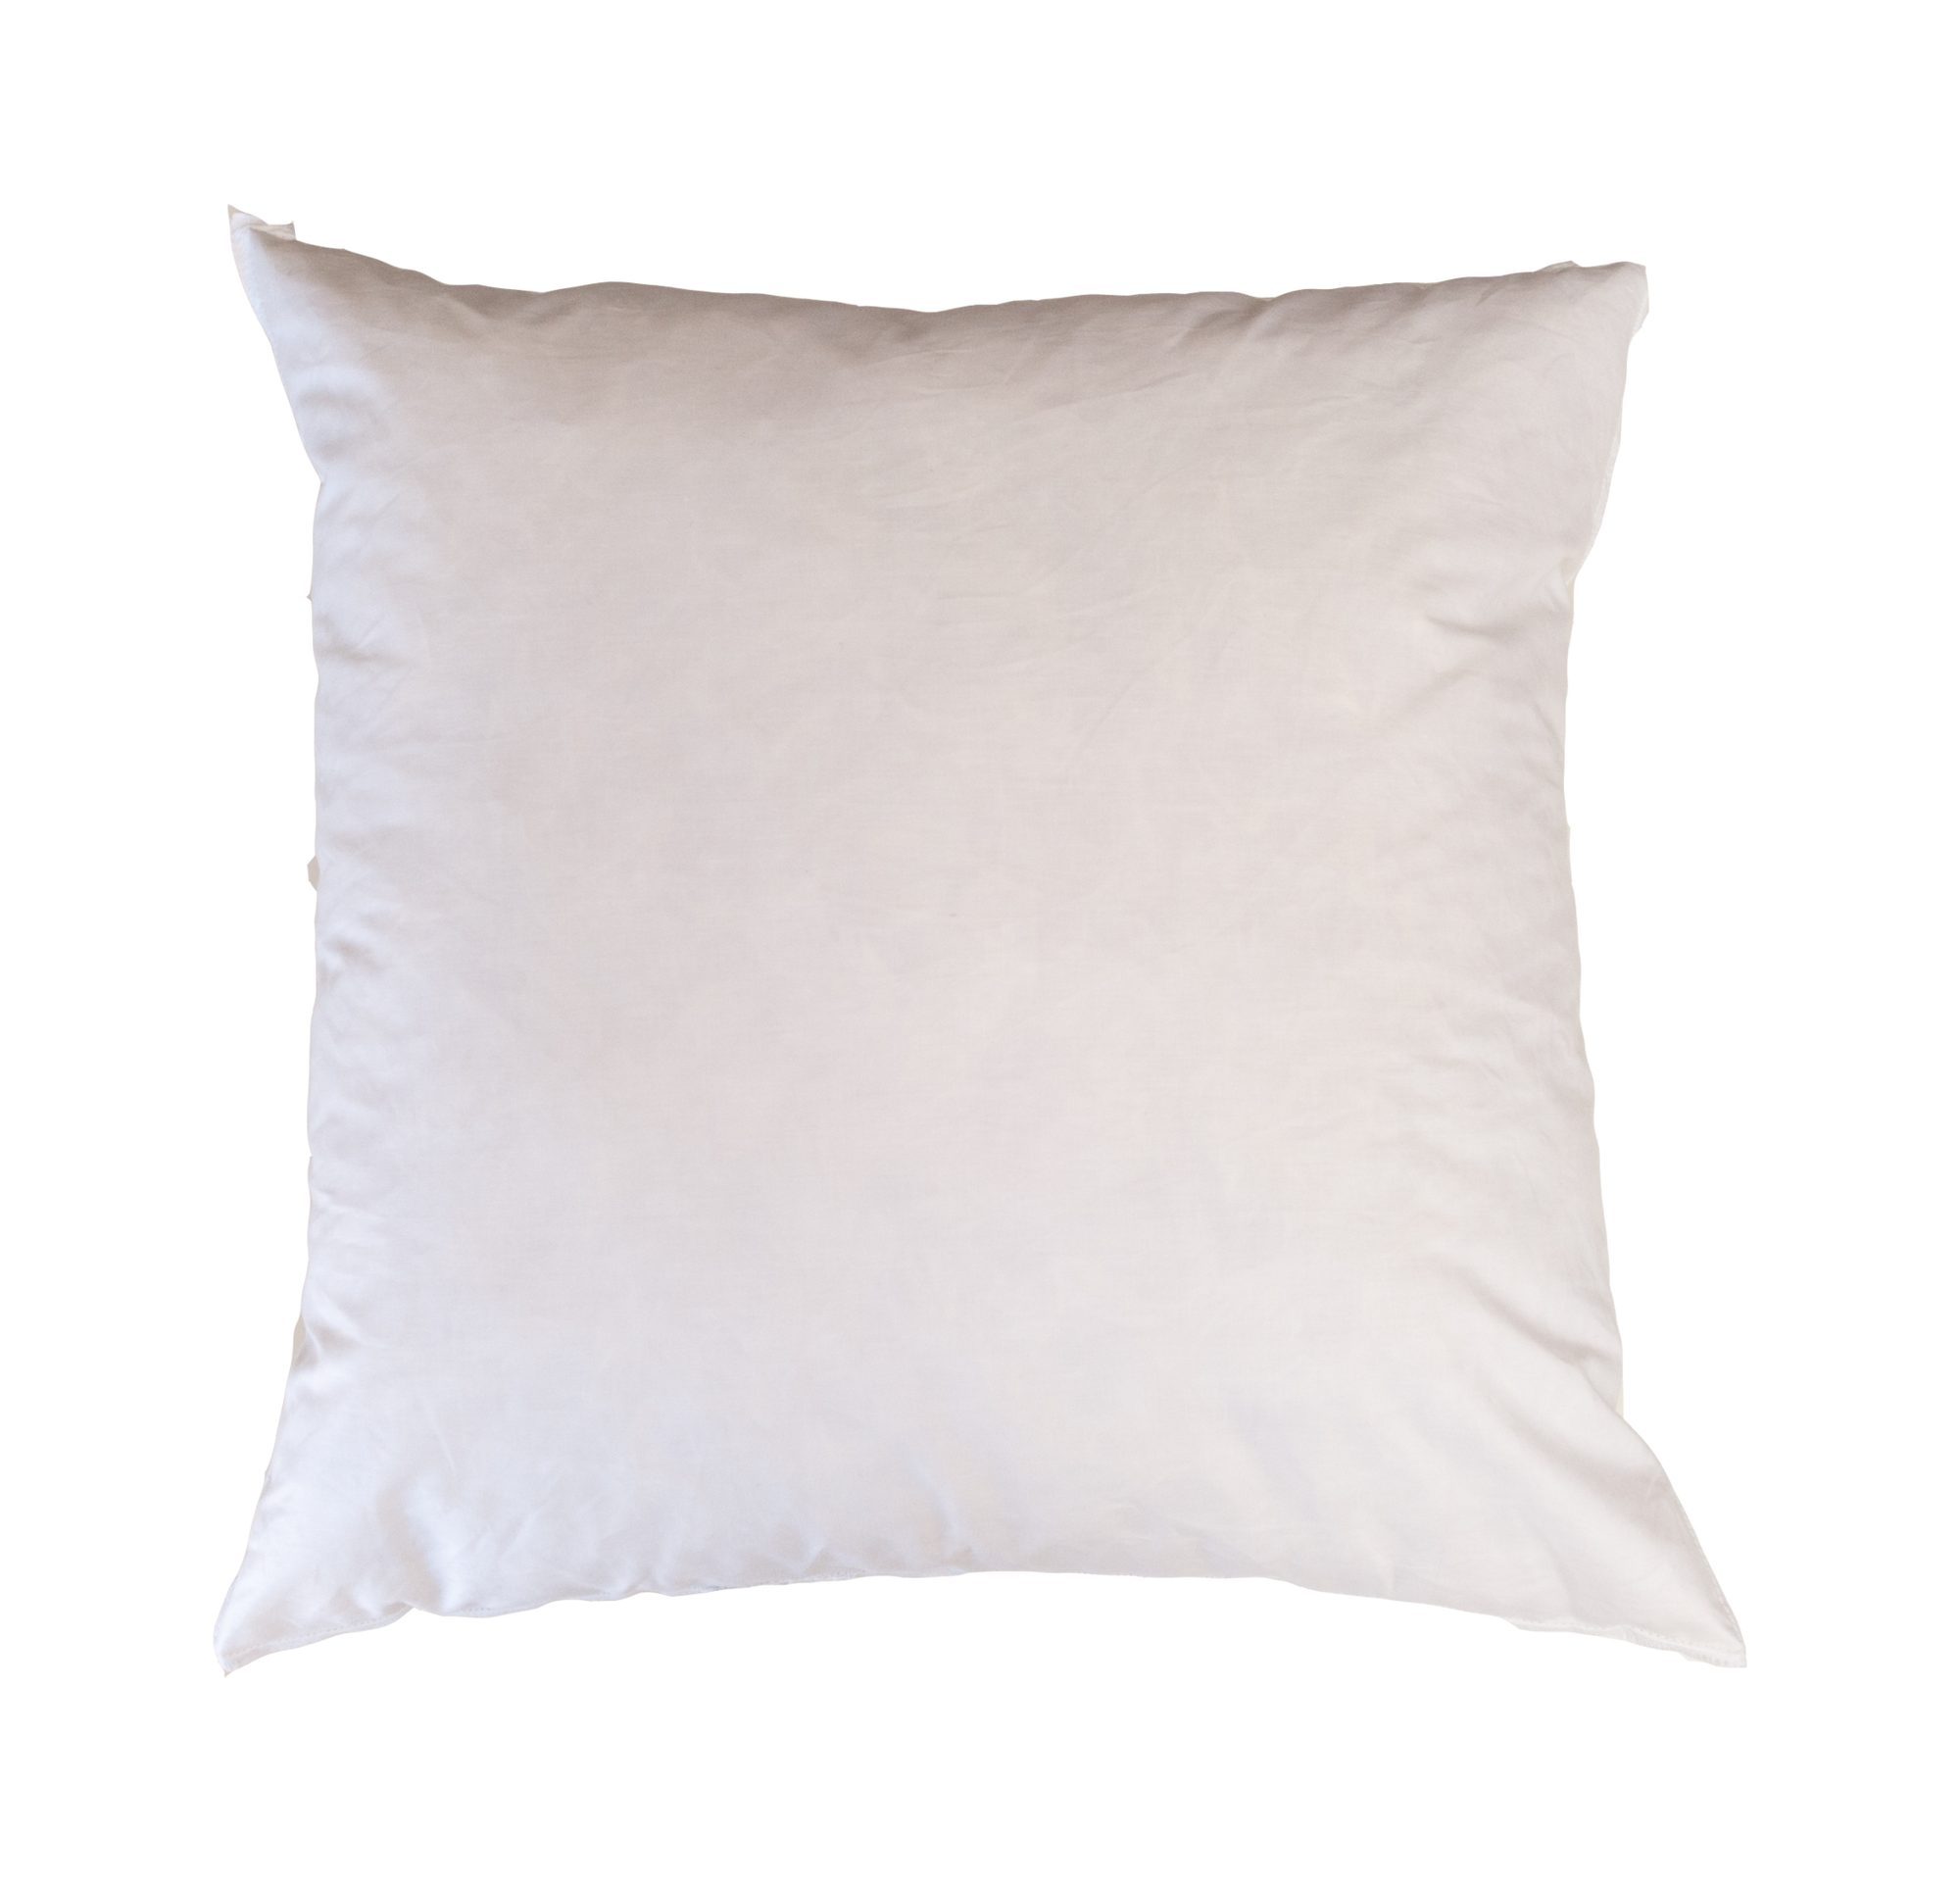 Decorative Throw Pillow Insert, Down and Feathers Fill, 100